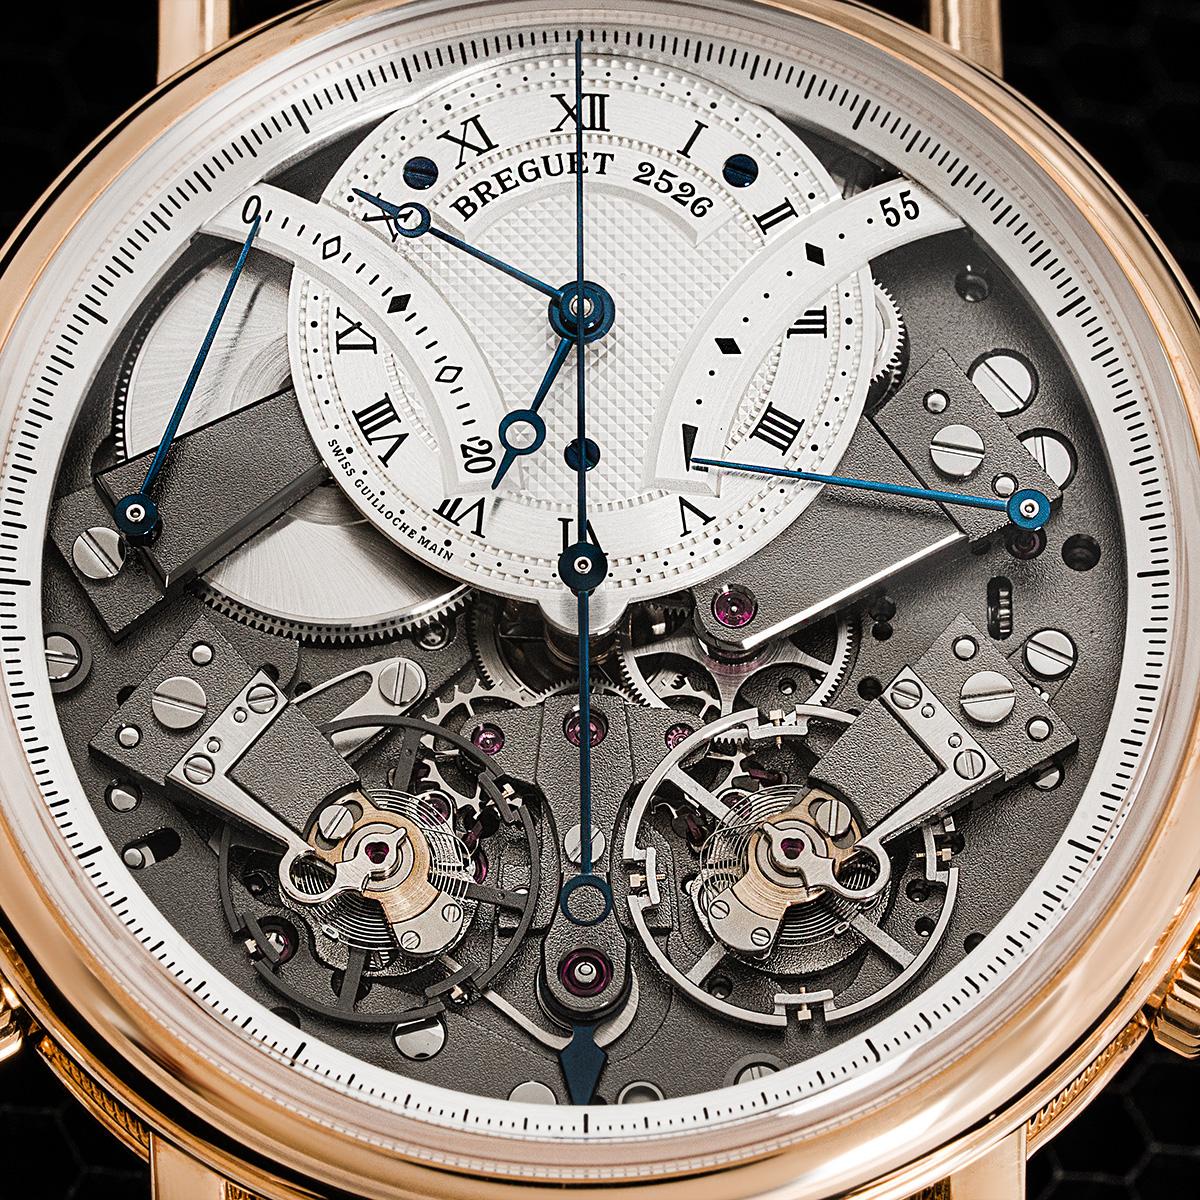 A 44m rose gold Tradition wristwatch by Breguet. Featuring a silver guilloche dial with an open face design, which allows you to see the inner mechanical movements of the watch. The watch also features a power reserve display, a 20-minute counter